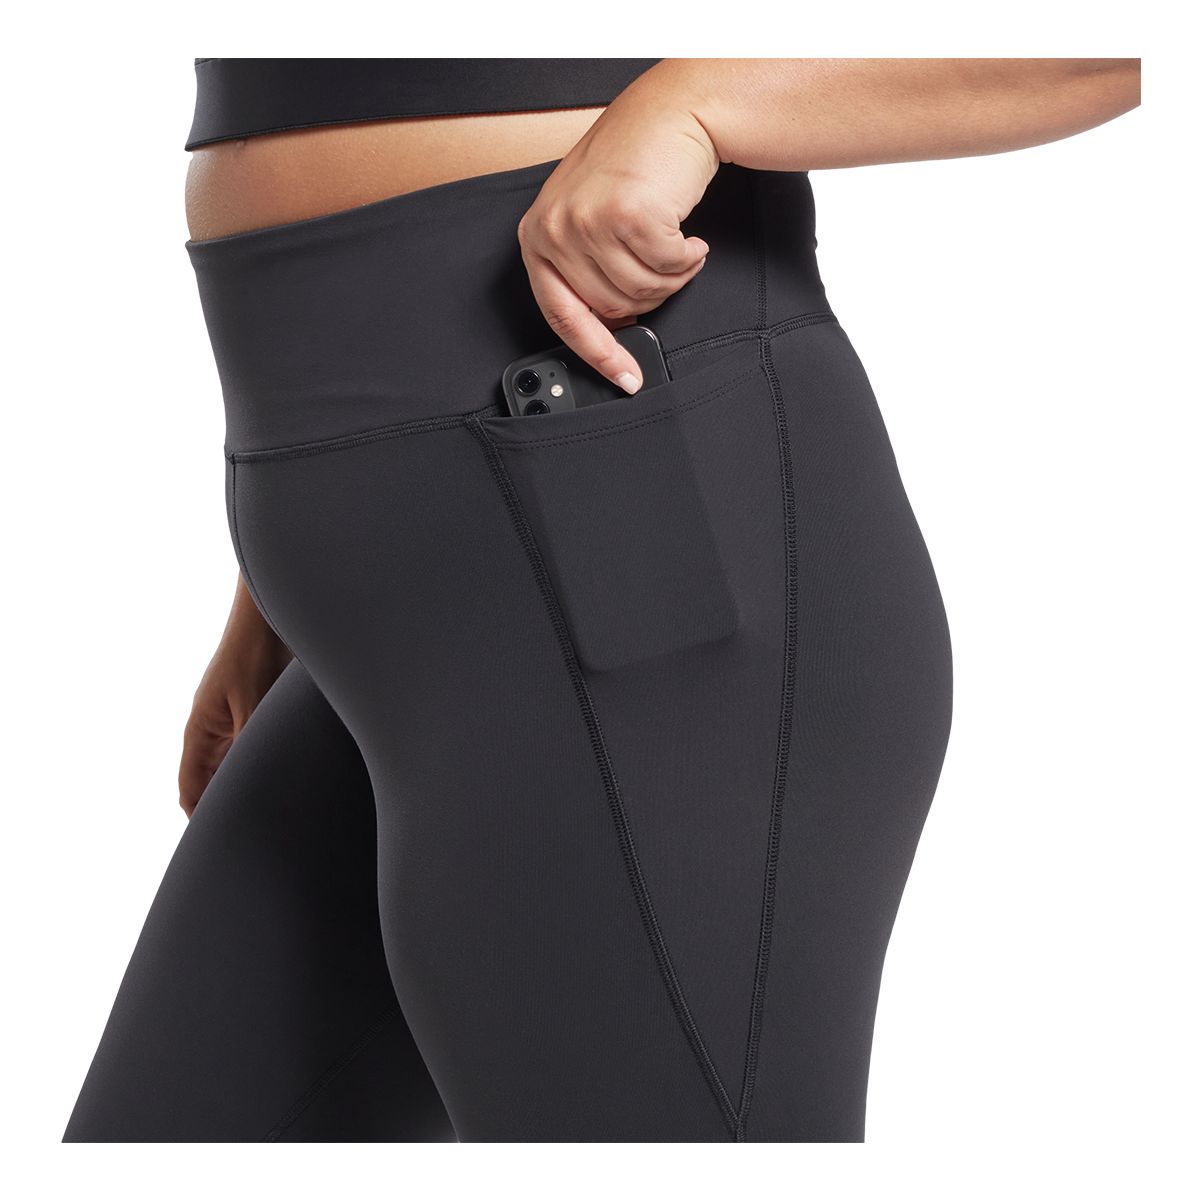 Fabletics Women's Activewear for sale in Vancouver, British